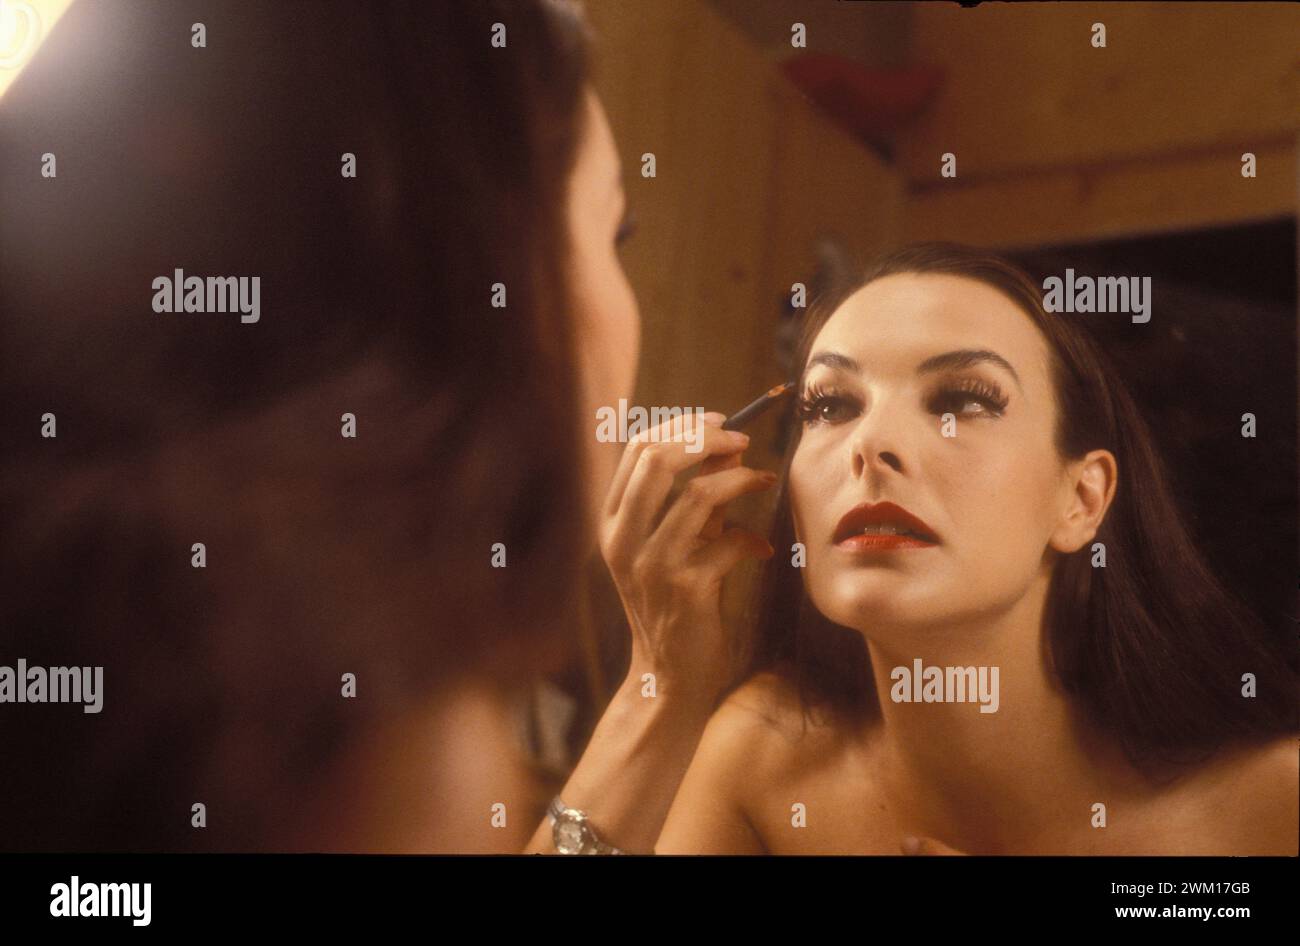 3831727 Carole Bouquet; (add.info.: French actress Carole Bouquet putting makeup on (about 1985) / L'attrice Carole Bouquet mentre si trucca (1985 circa)); © Marcello Mencarini. All rights reserved 2024. Stock Photo